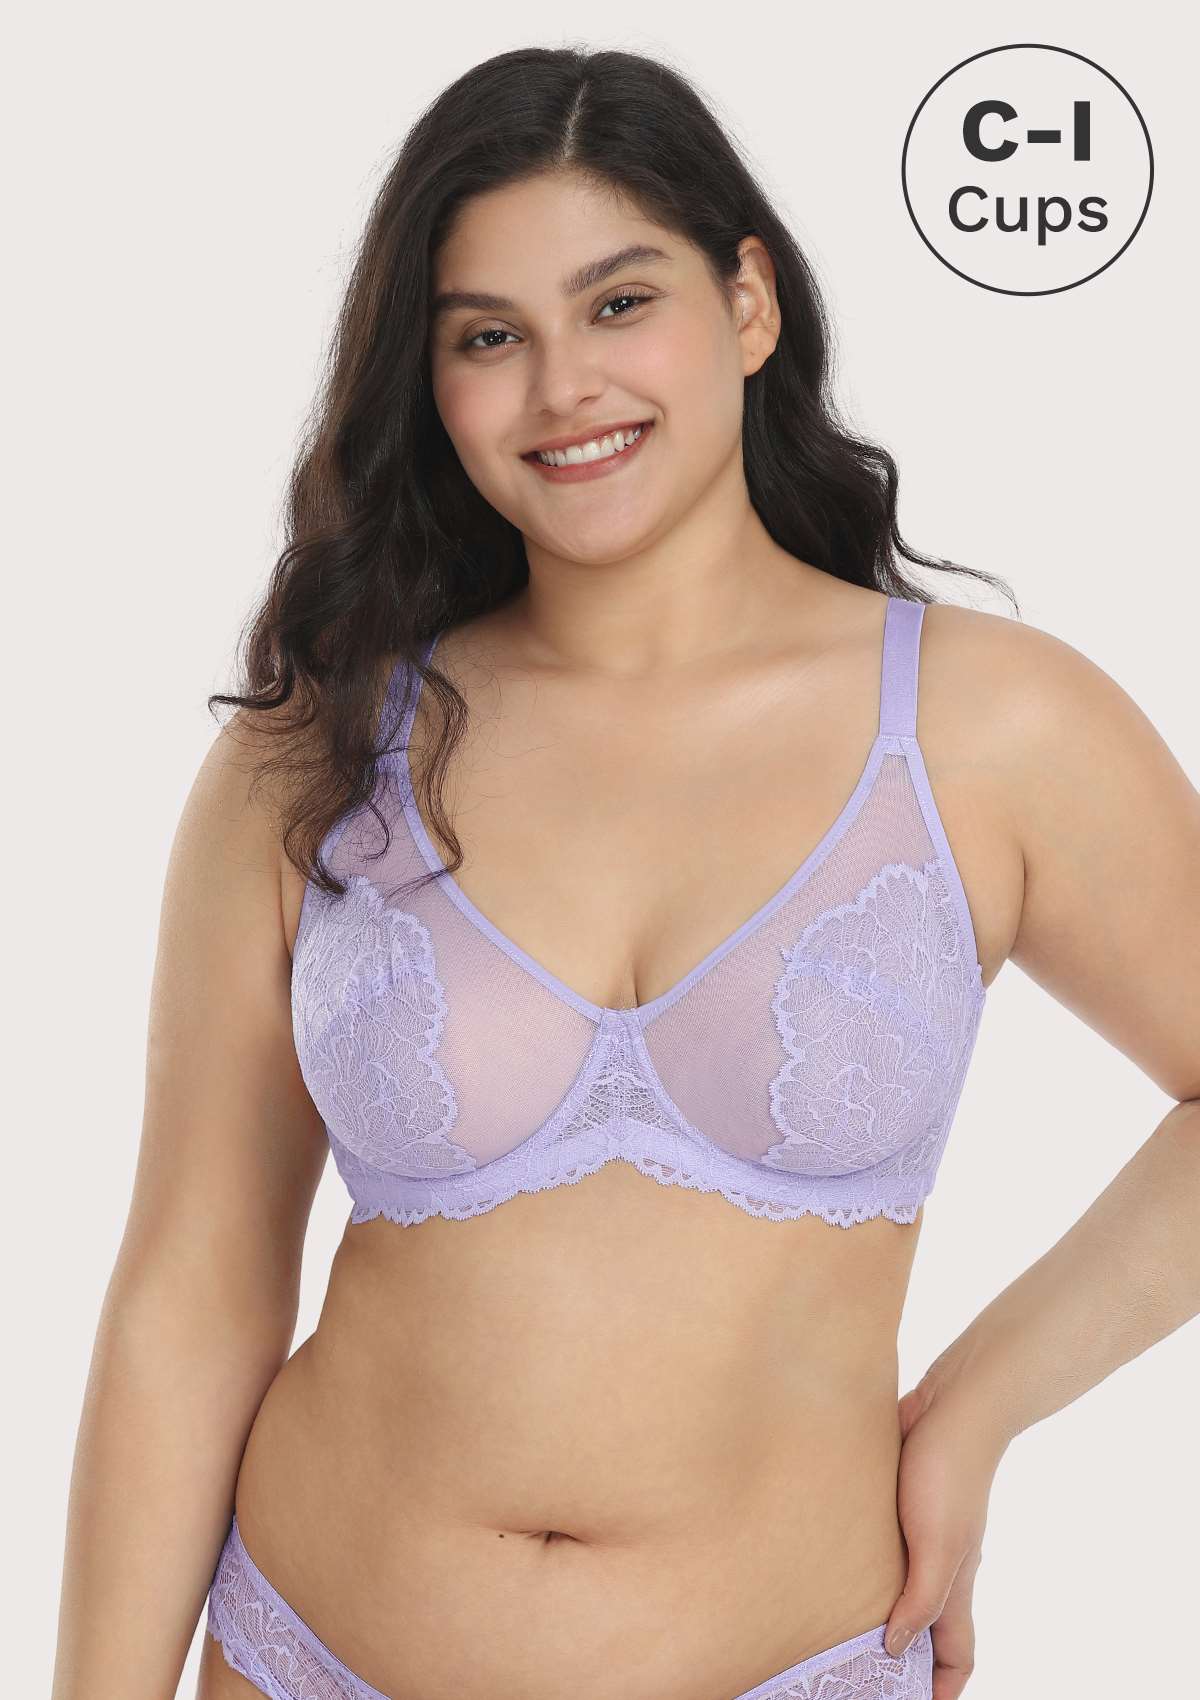 HSIA Blossom Transparent Lace Bra: Plus Size Wired Back Smoothing Bra - Light Purple / 40 / C